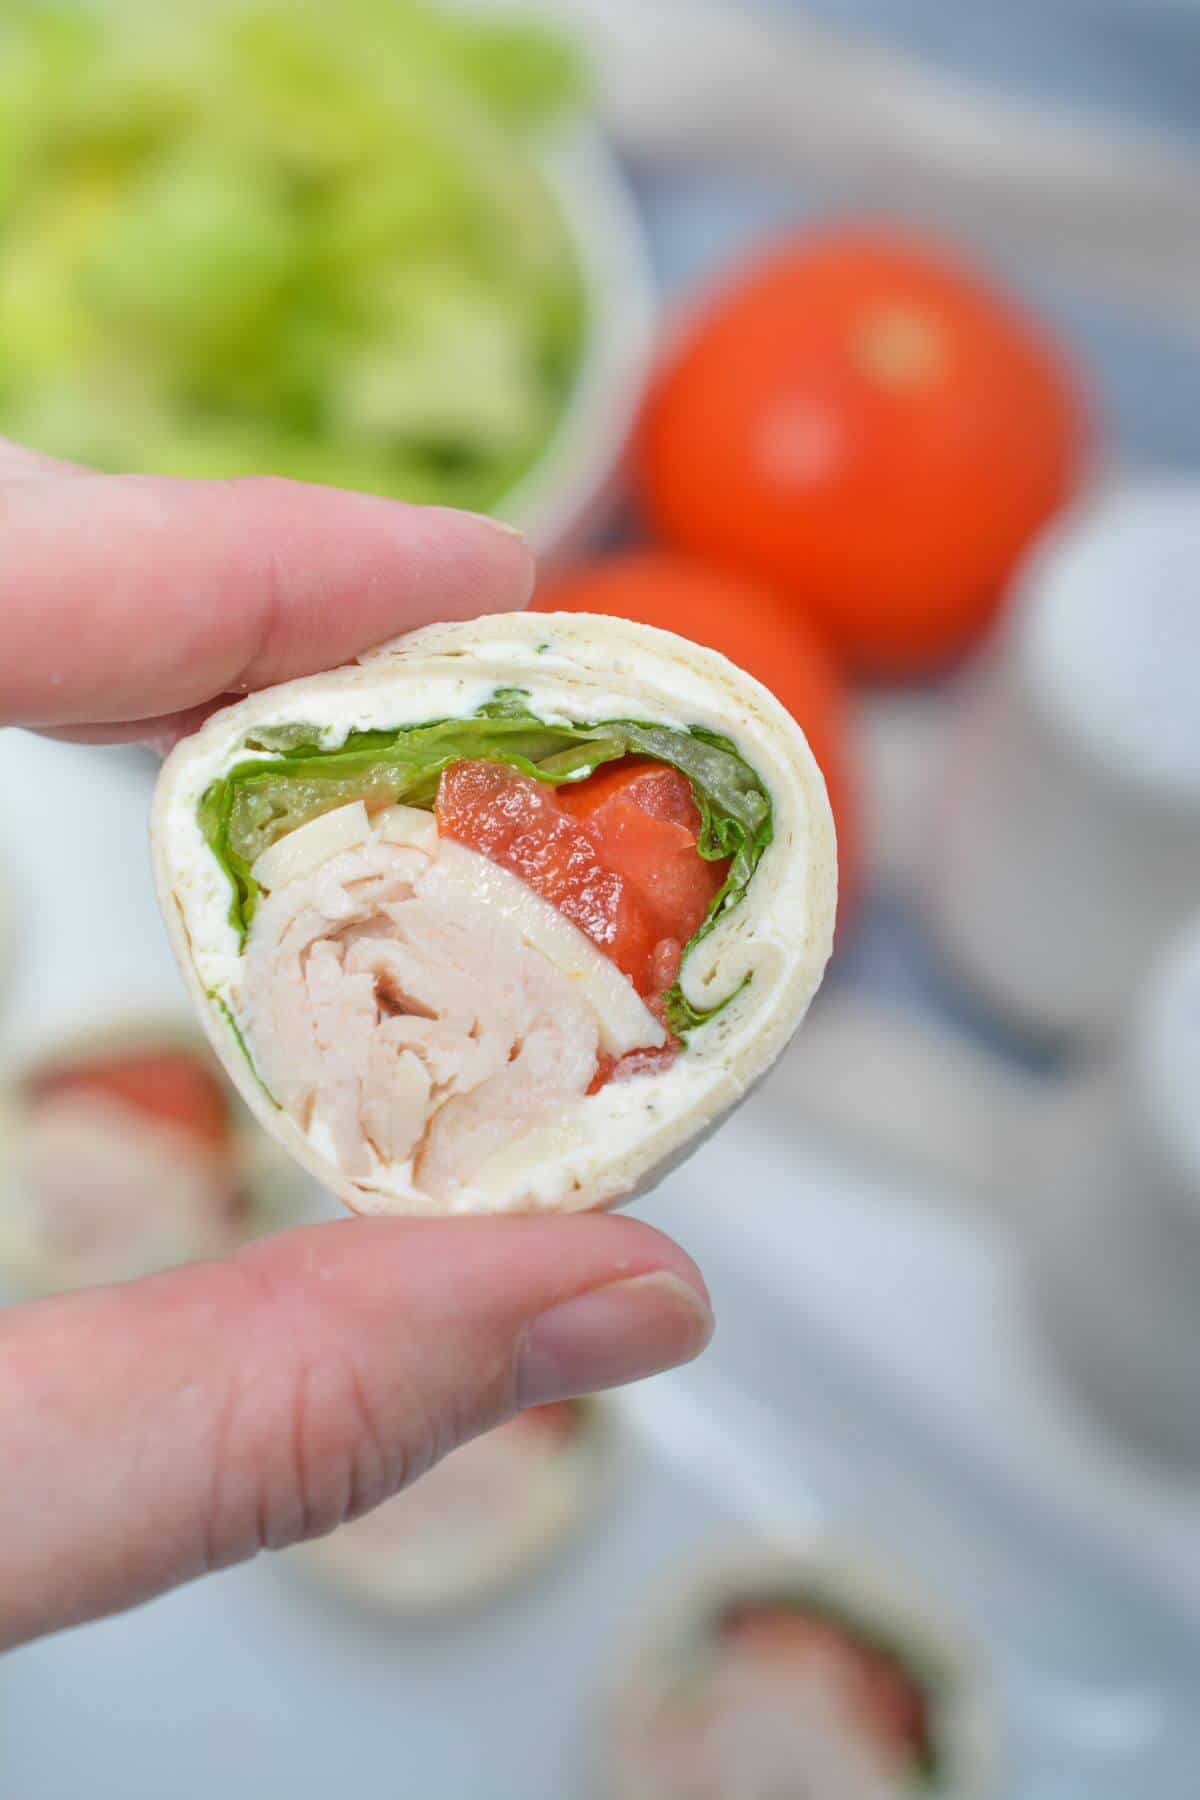 A person holding a chicken wrap with tomatoes and lettuce.